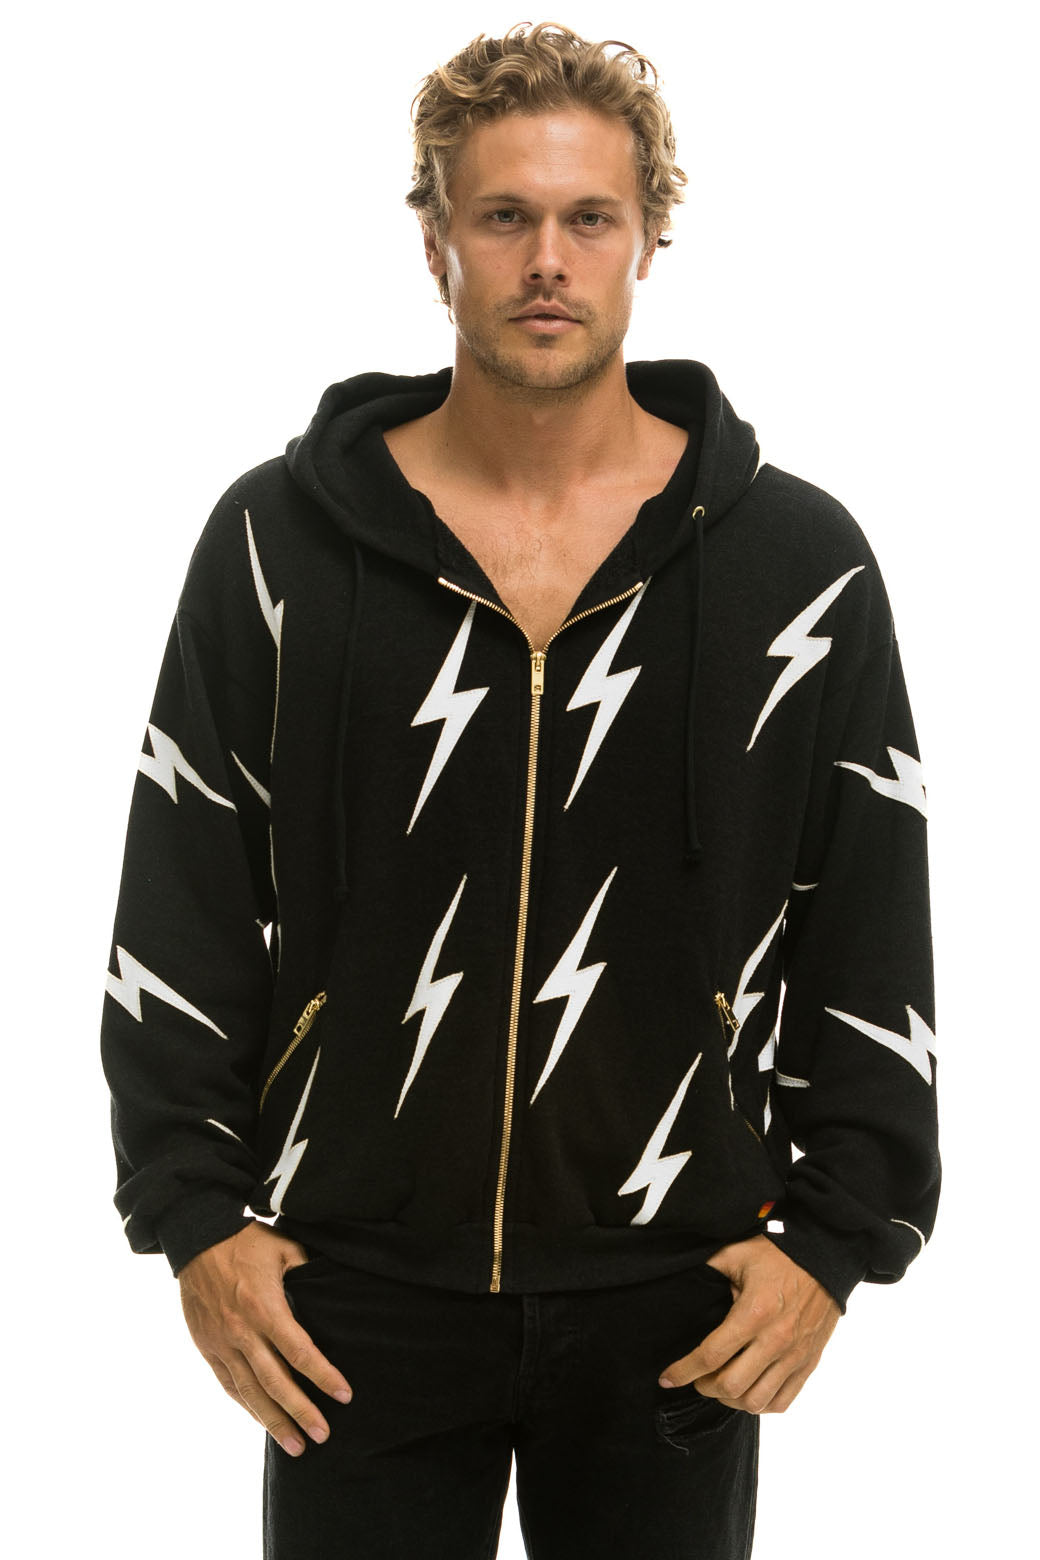 BOLT STITCH REPEAT RELAXED ZIP HOODIE WITH POCKET ZIPPERS- BLACK // WHITE Hoodie Aviator Nation 